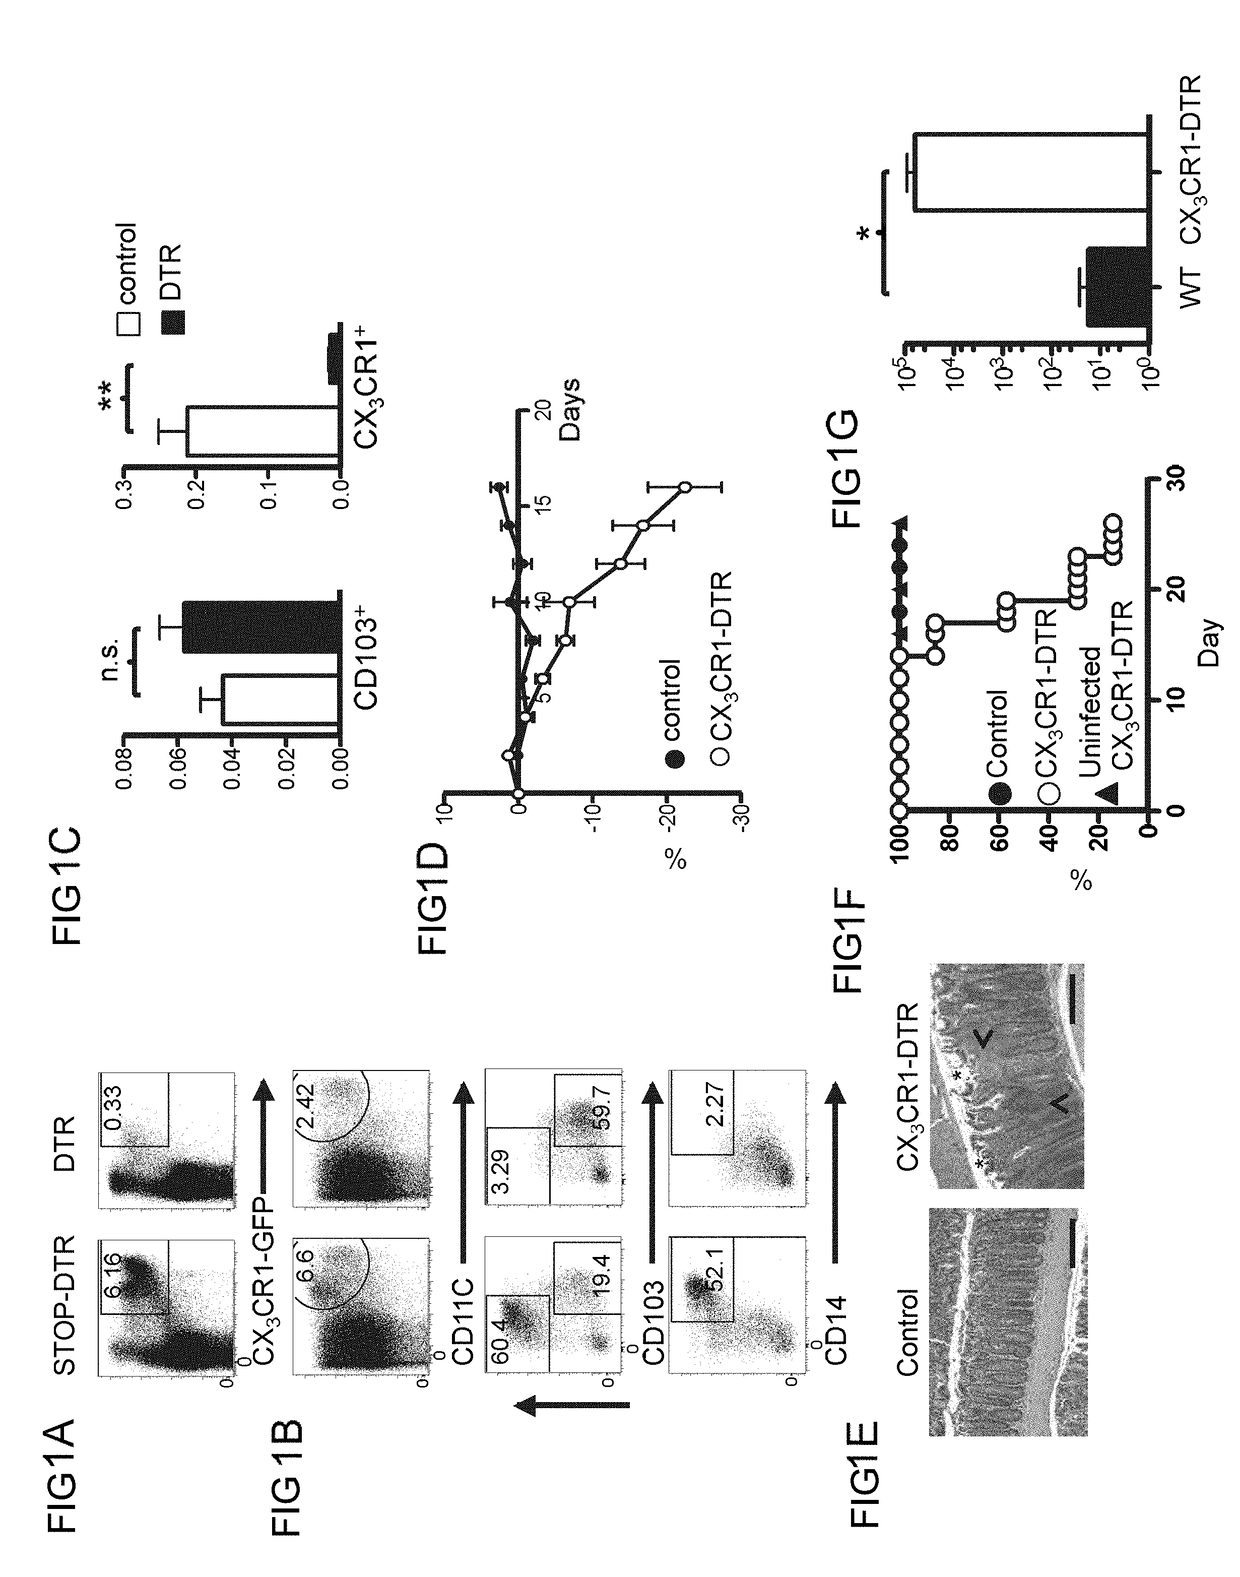 Methods of treating inflammatory bowel disease by administering tumor necrosis factor-like ligand 1A or an agonistic death-domain receptor 3 antibody